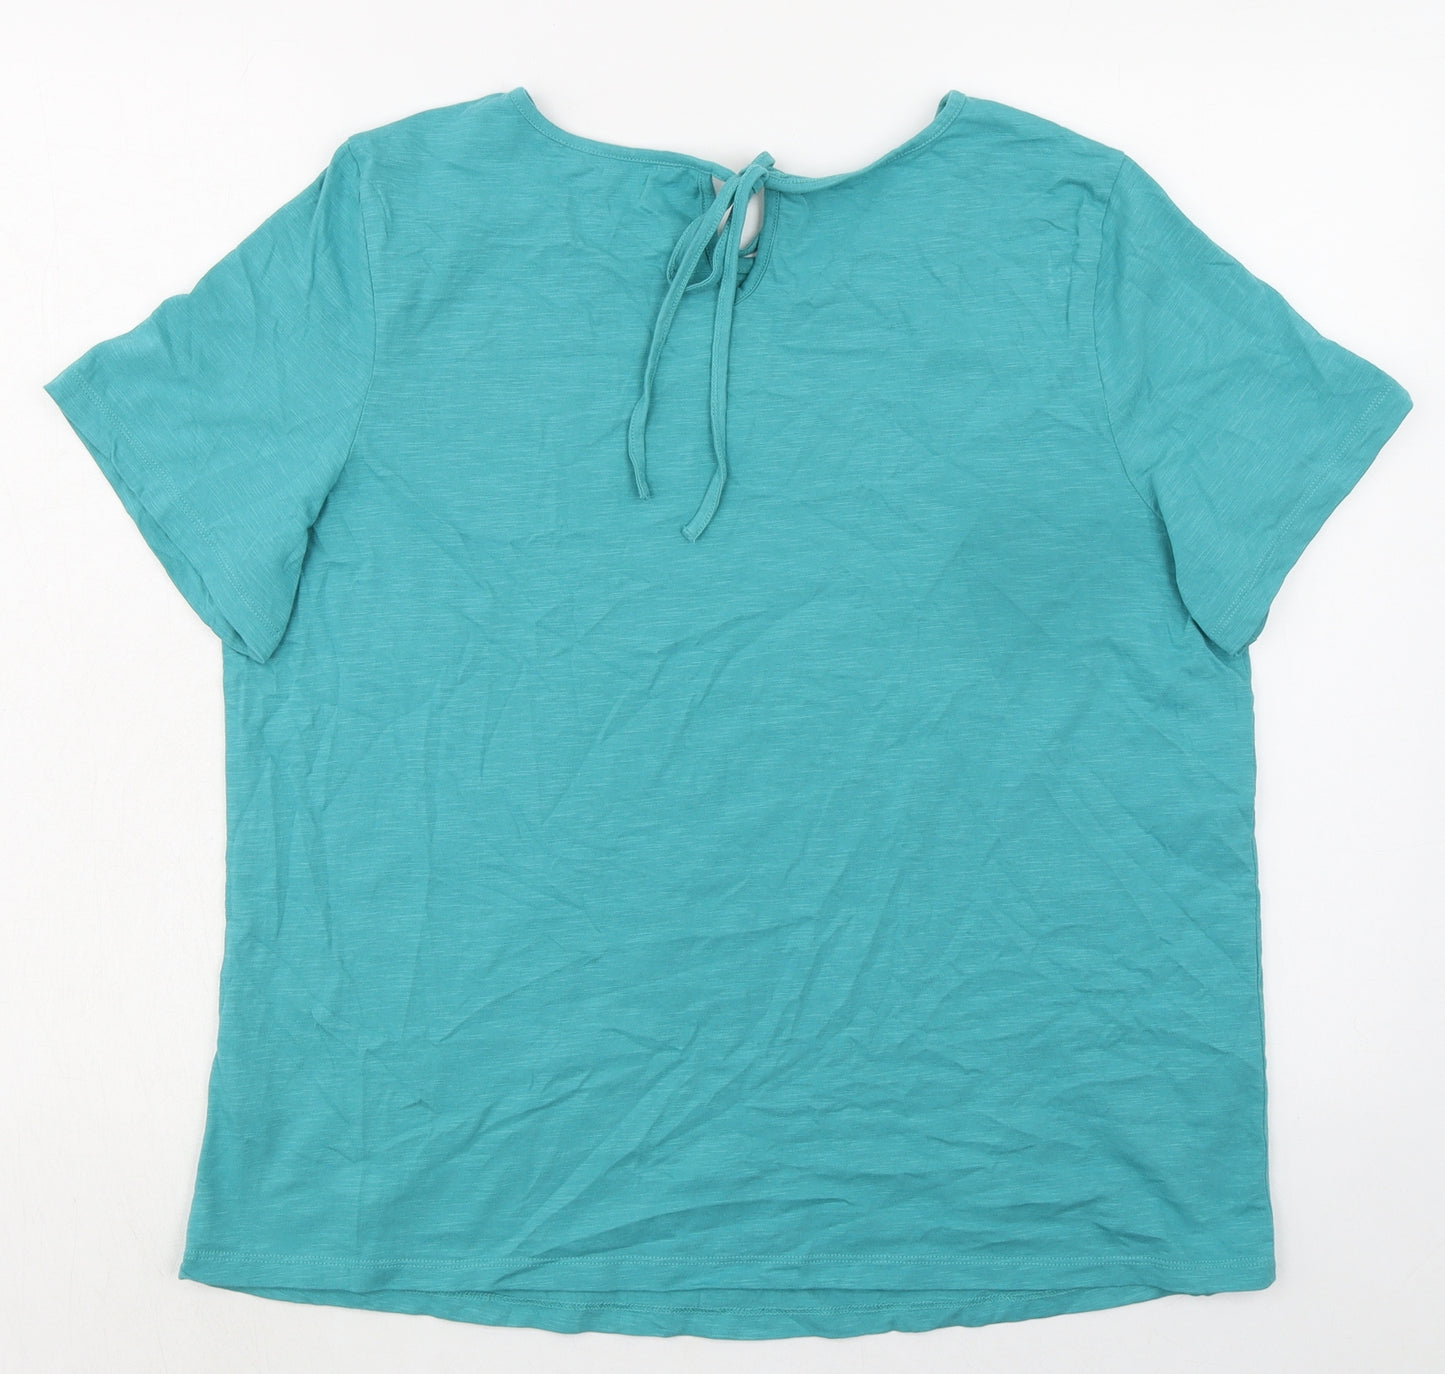 Bonmarché Womens Green 100% Cotton Basic T-Shirt Size 16 Boat Neck - Broderie Anglaise Details